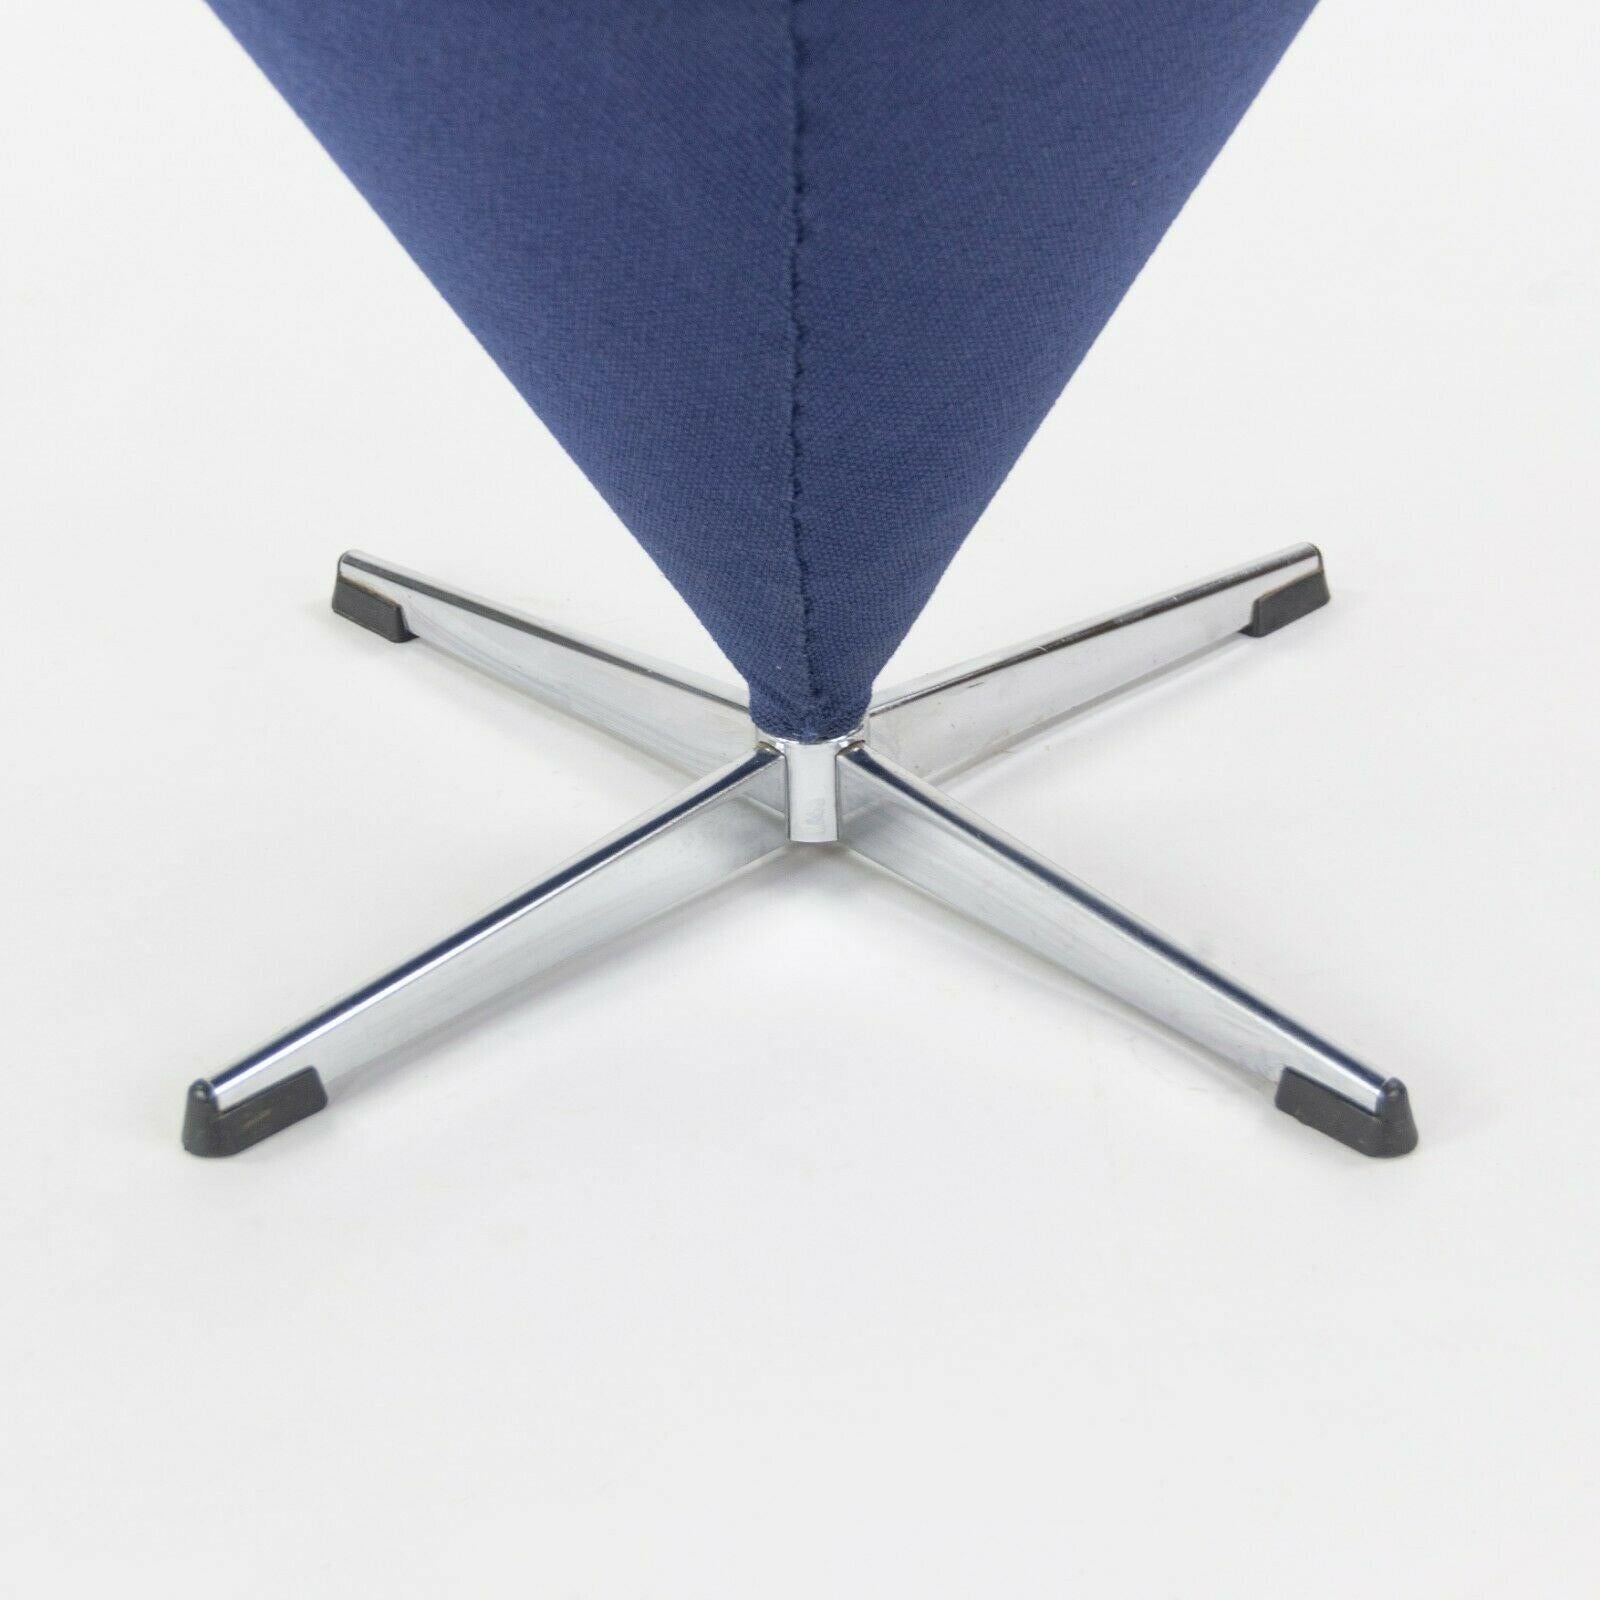 Mid-20th Century 1960s Verner Panton Cone Chair Blue Fabric Made in Denmark for Plus-Linje Vitra